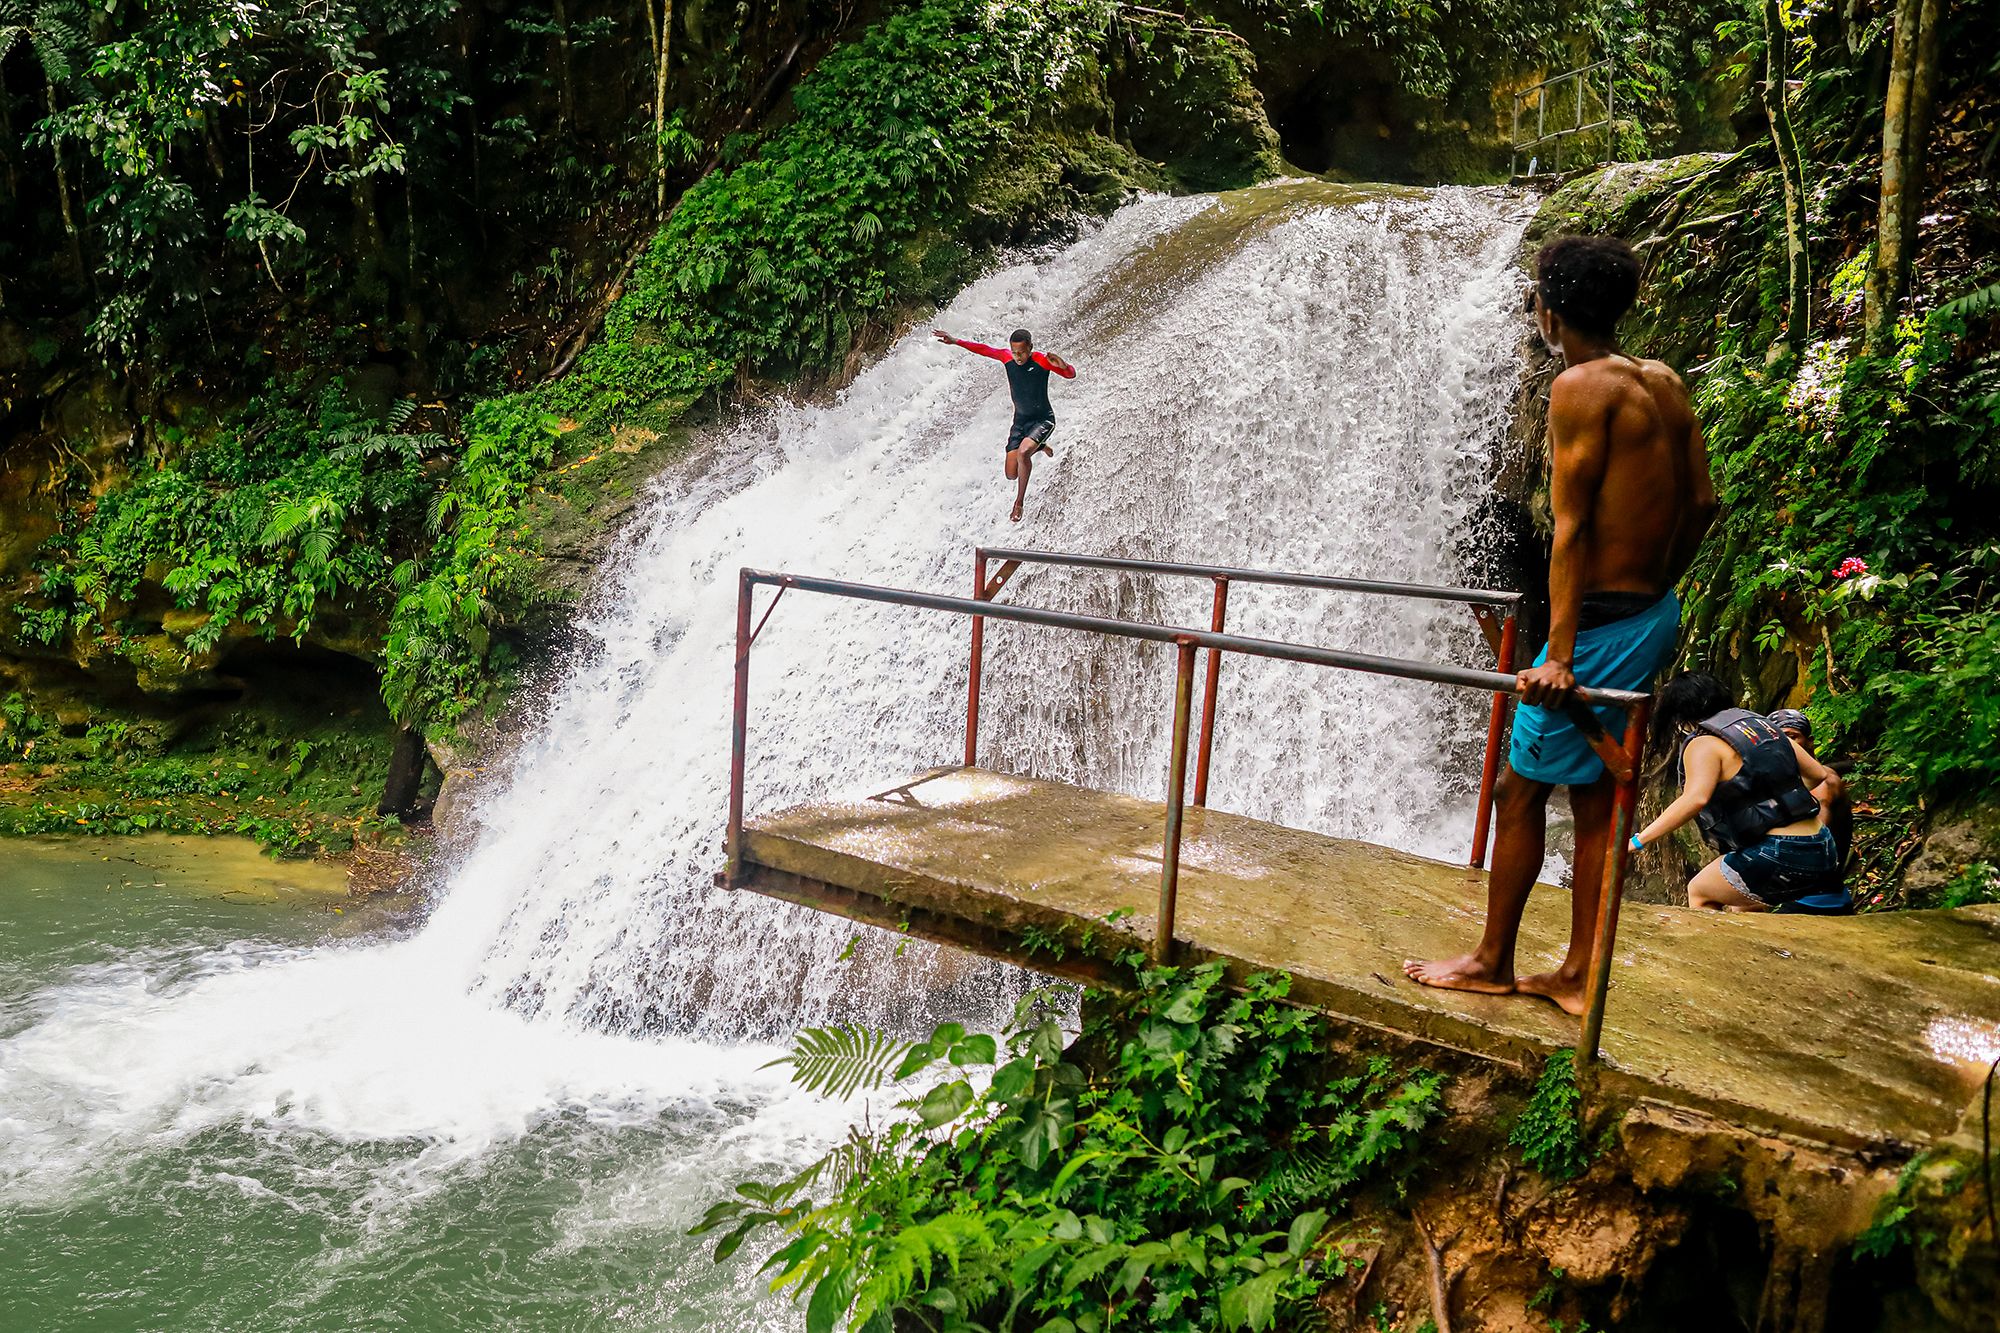 Never A Dull Moment In Ocho Rios Jamaica With These Amazing Things To Do!